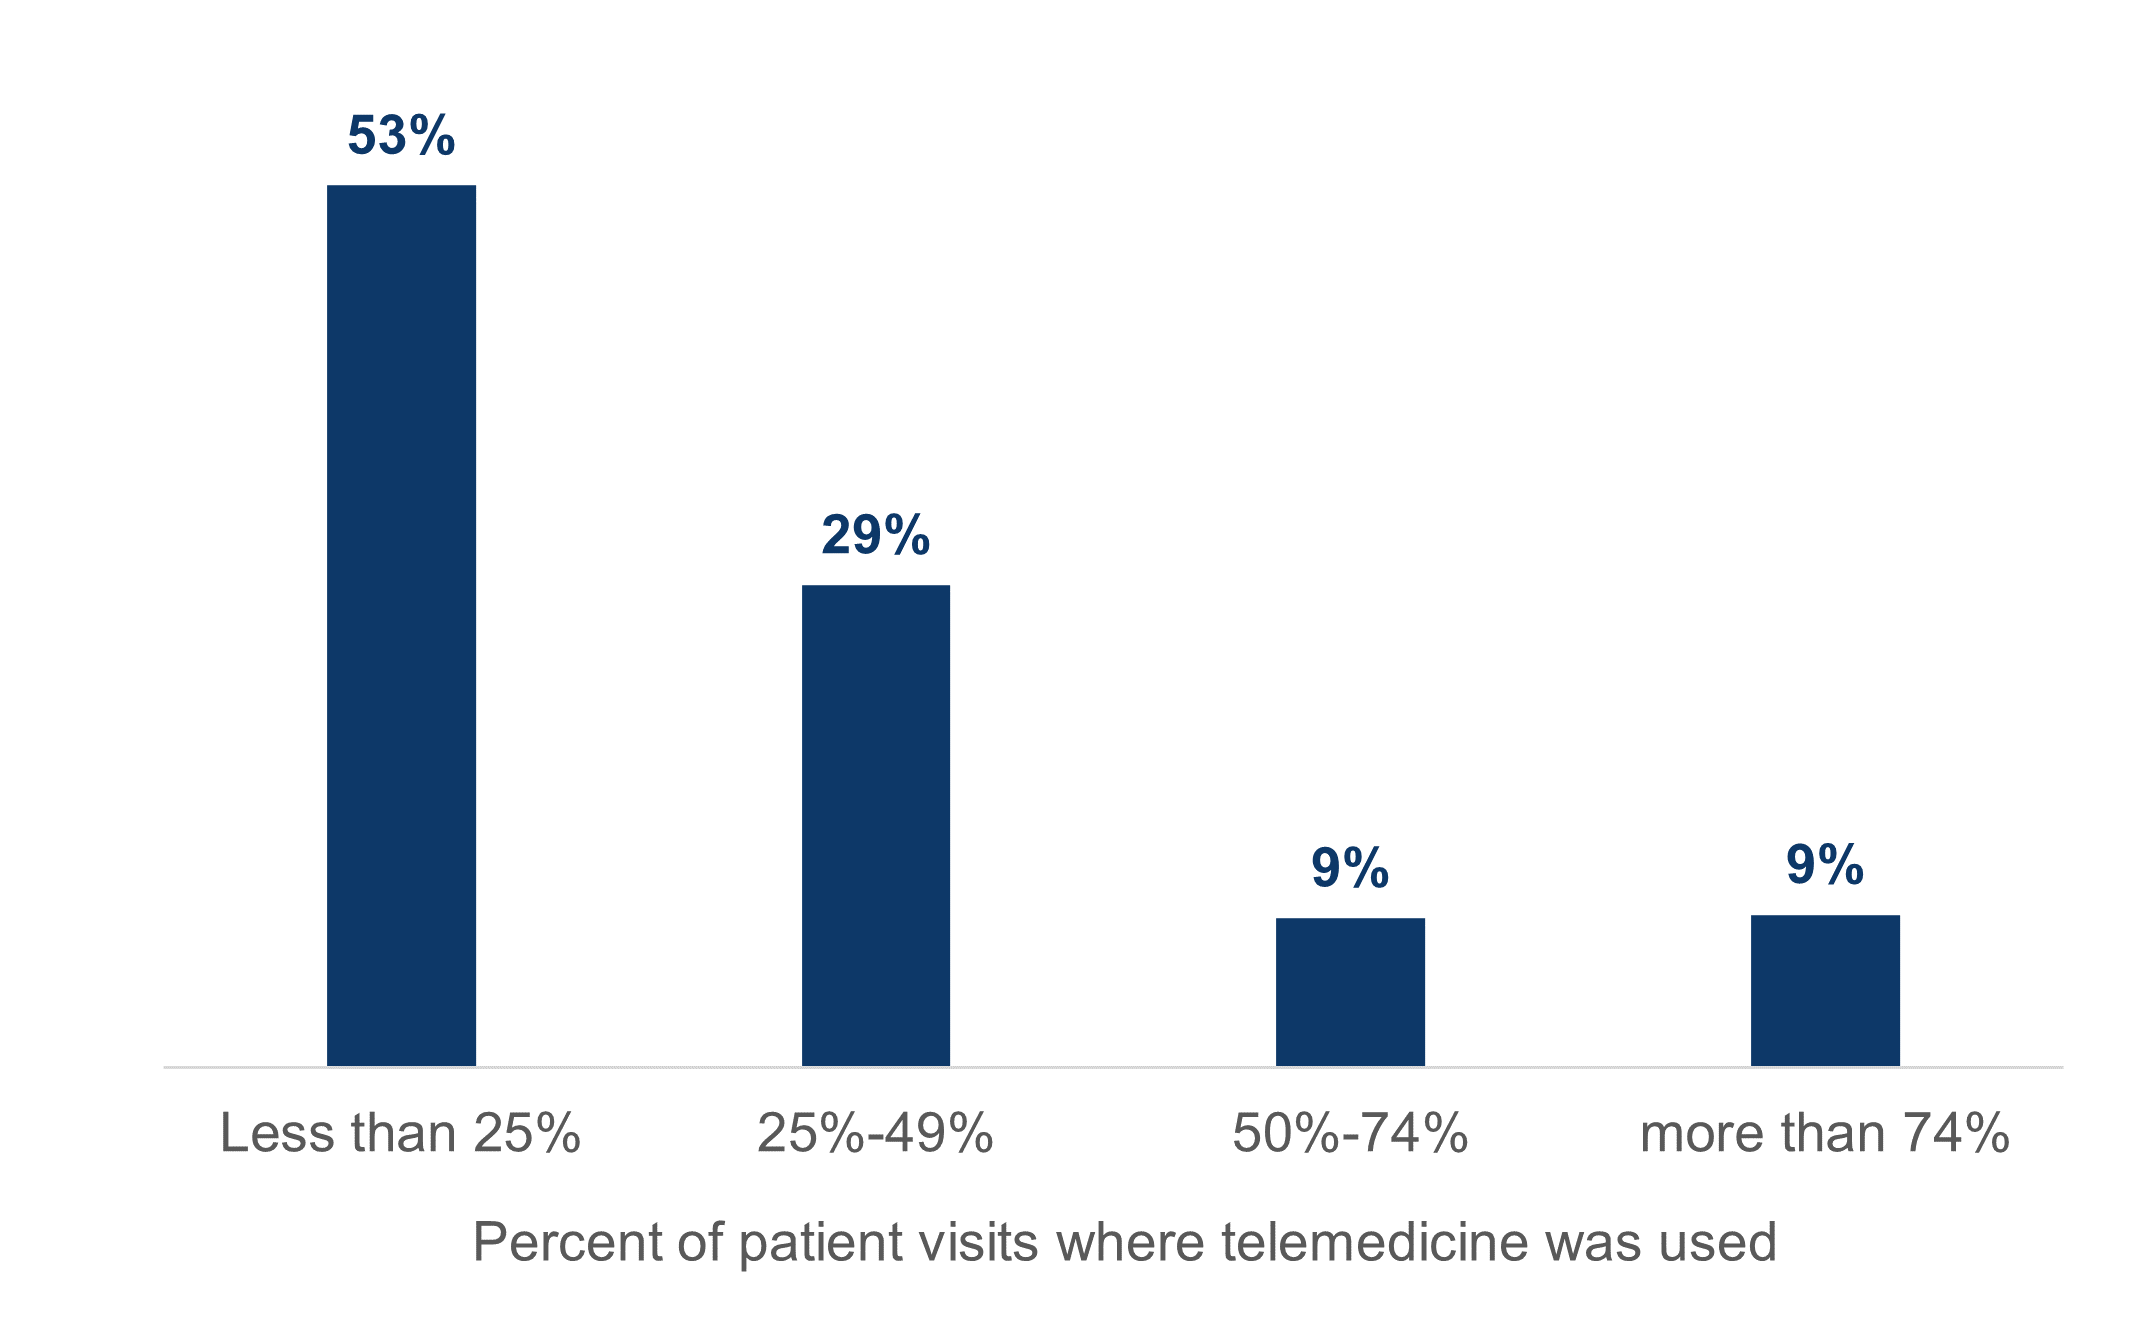 Figure showing the percentage of physicians who used telemedicine by patient visit volume, in 2021. 53% of patients used telemedicine by less than 20% of the time for their doctor's visit. 29% of patients used telelmedicine between 25% and 49% of the time for their doctor's visit. 9% used telemedicine between 50% and 74% of the time for their doctor visit. 9% used telemedicine more than 74% of the time for their doctor visit.